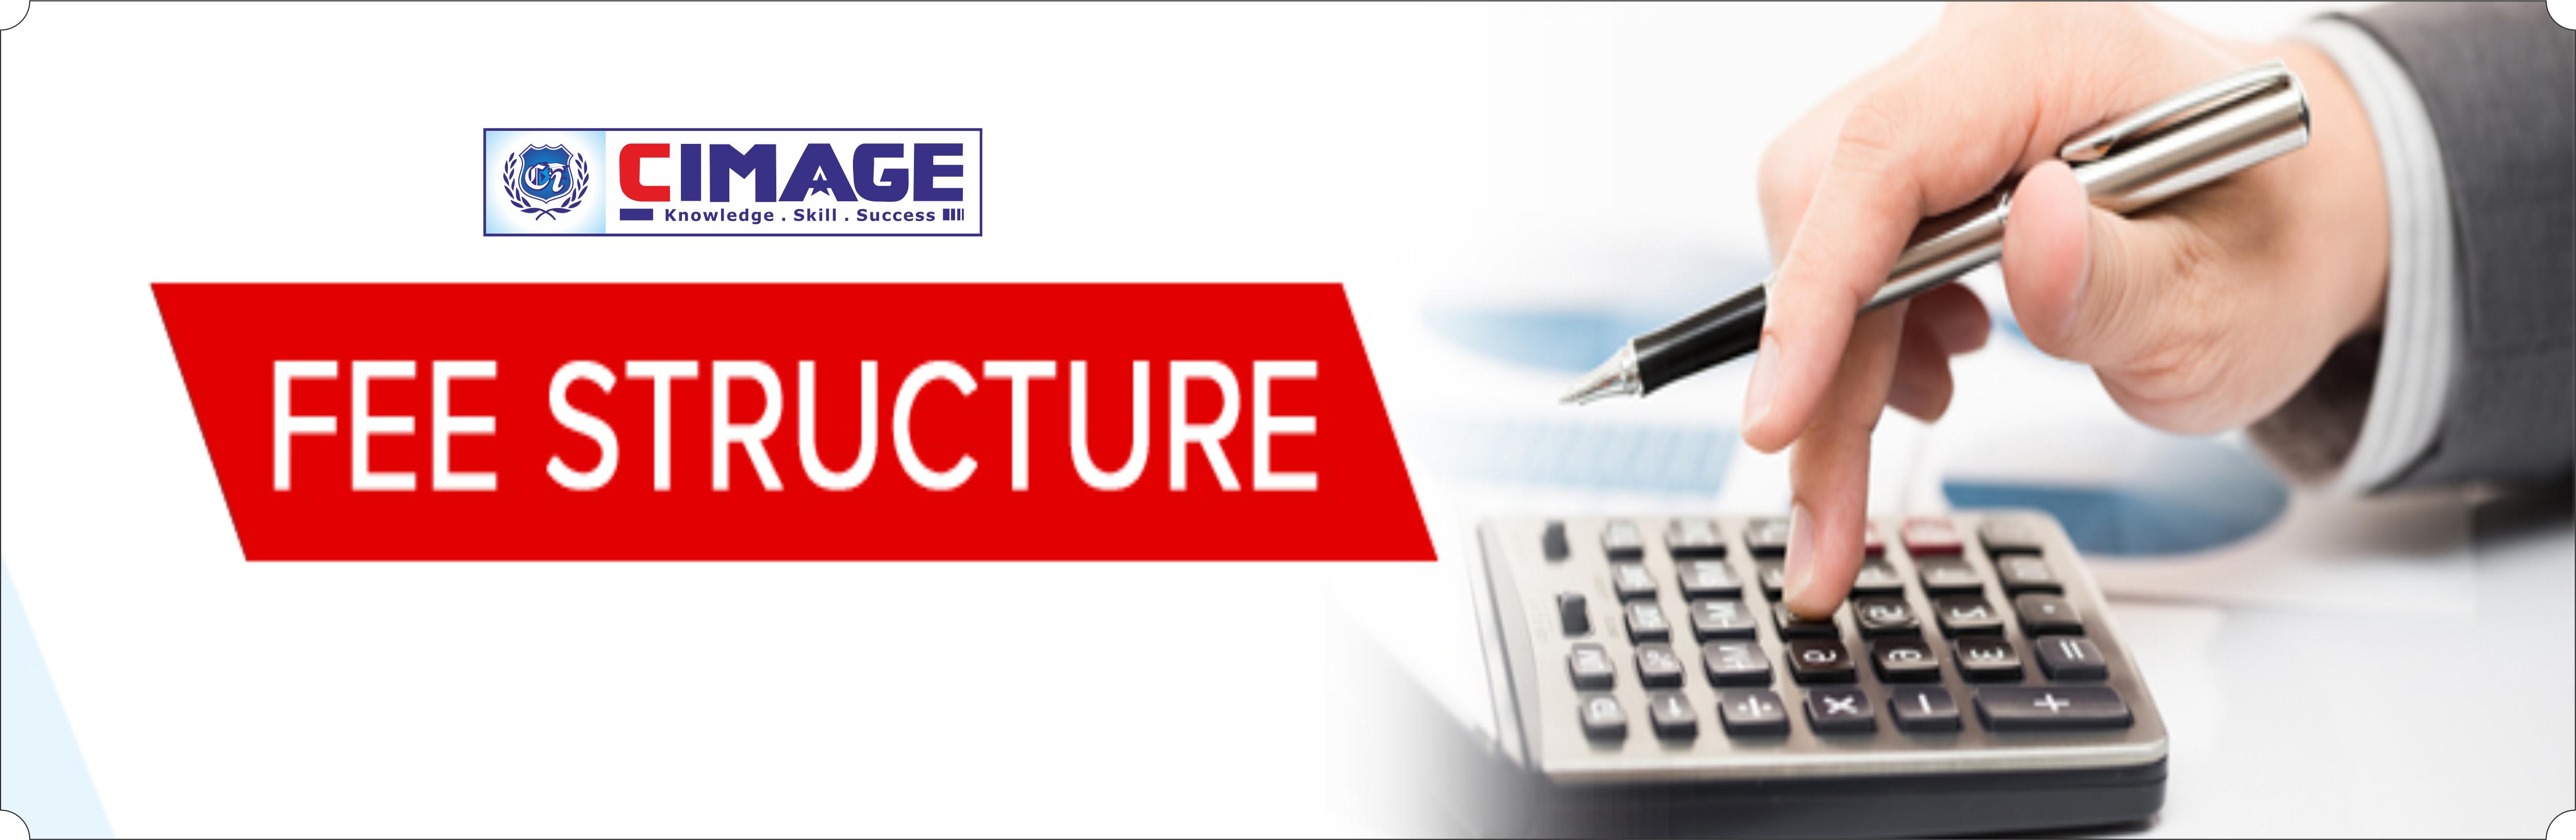 BCA Fee Structure | BBA Fee Structure | CIMAGE Professional College